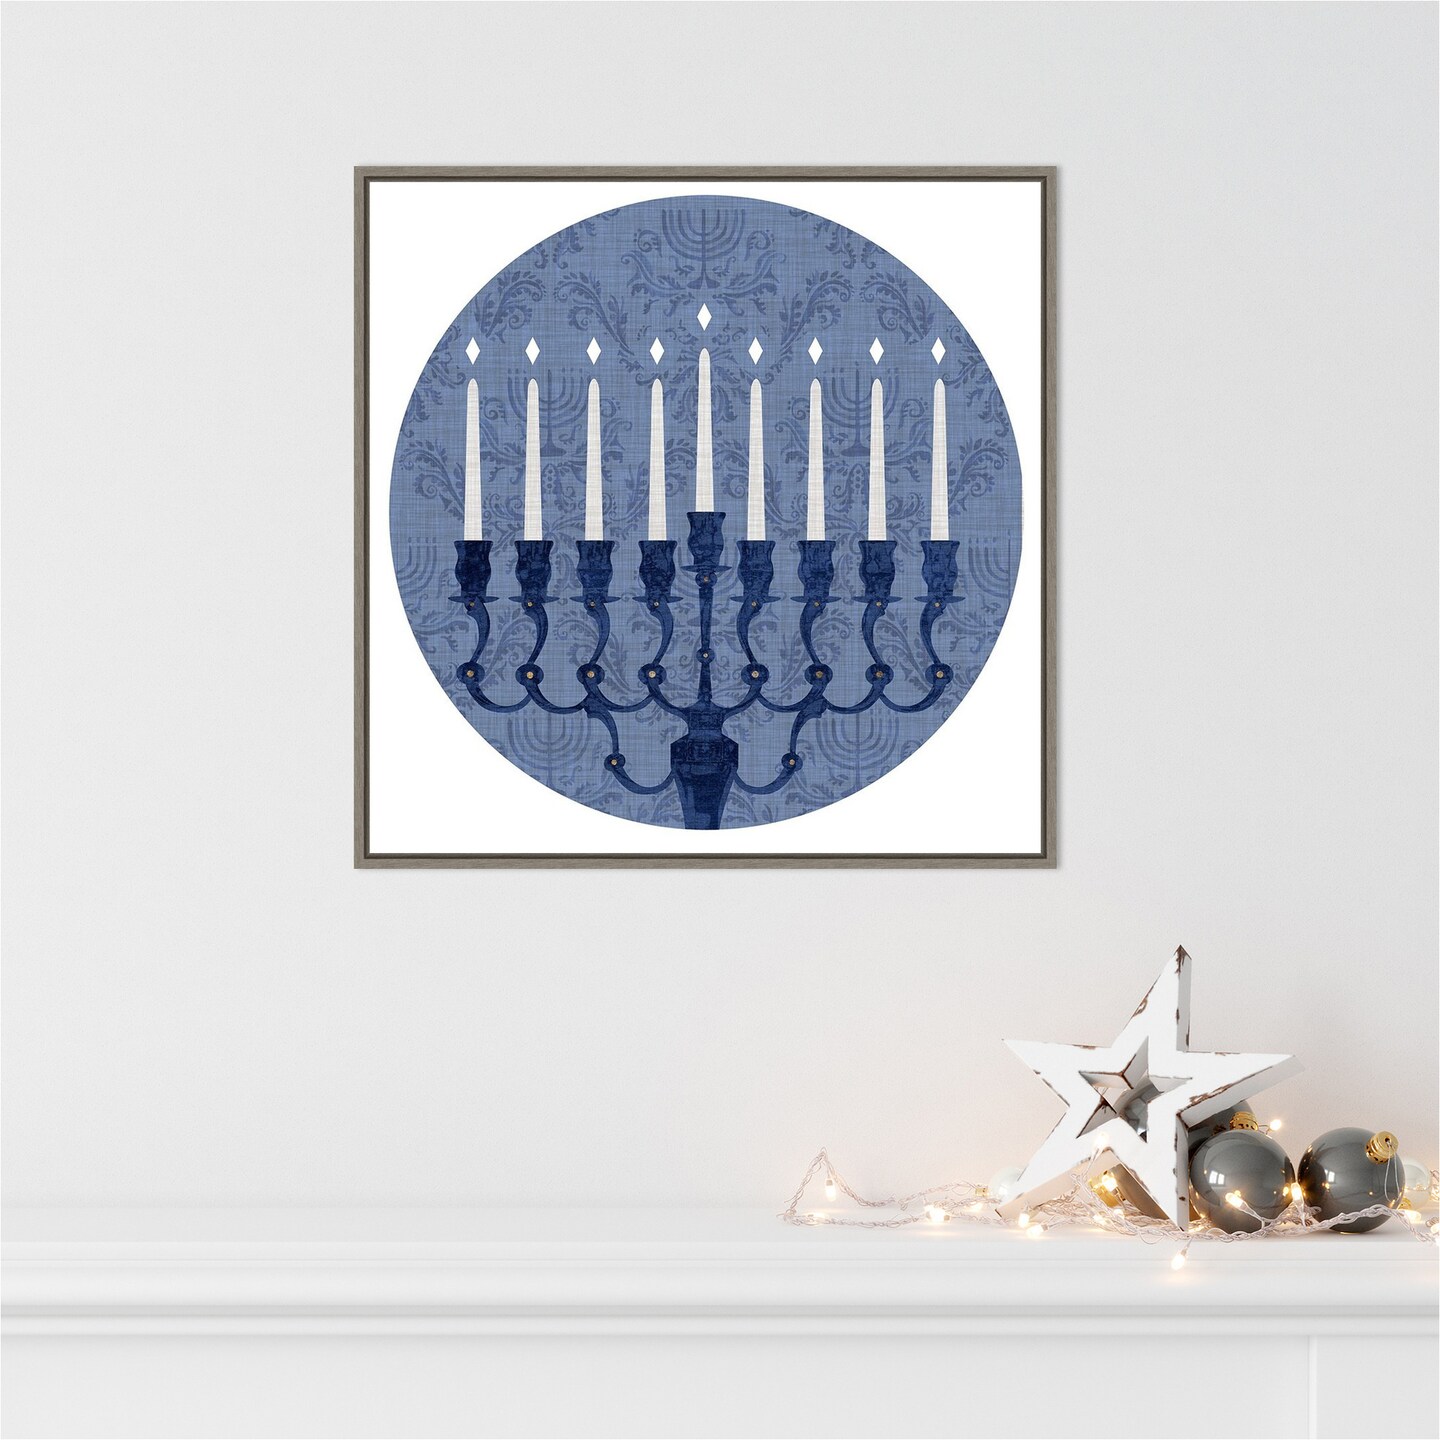 Sophisticated Hanukkah Collection C by Victoria Borges 22-in. W x 22-in. H. Canvas Wall Art Print Framed in Grey